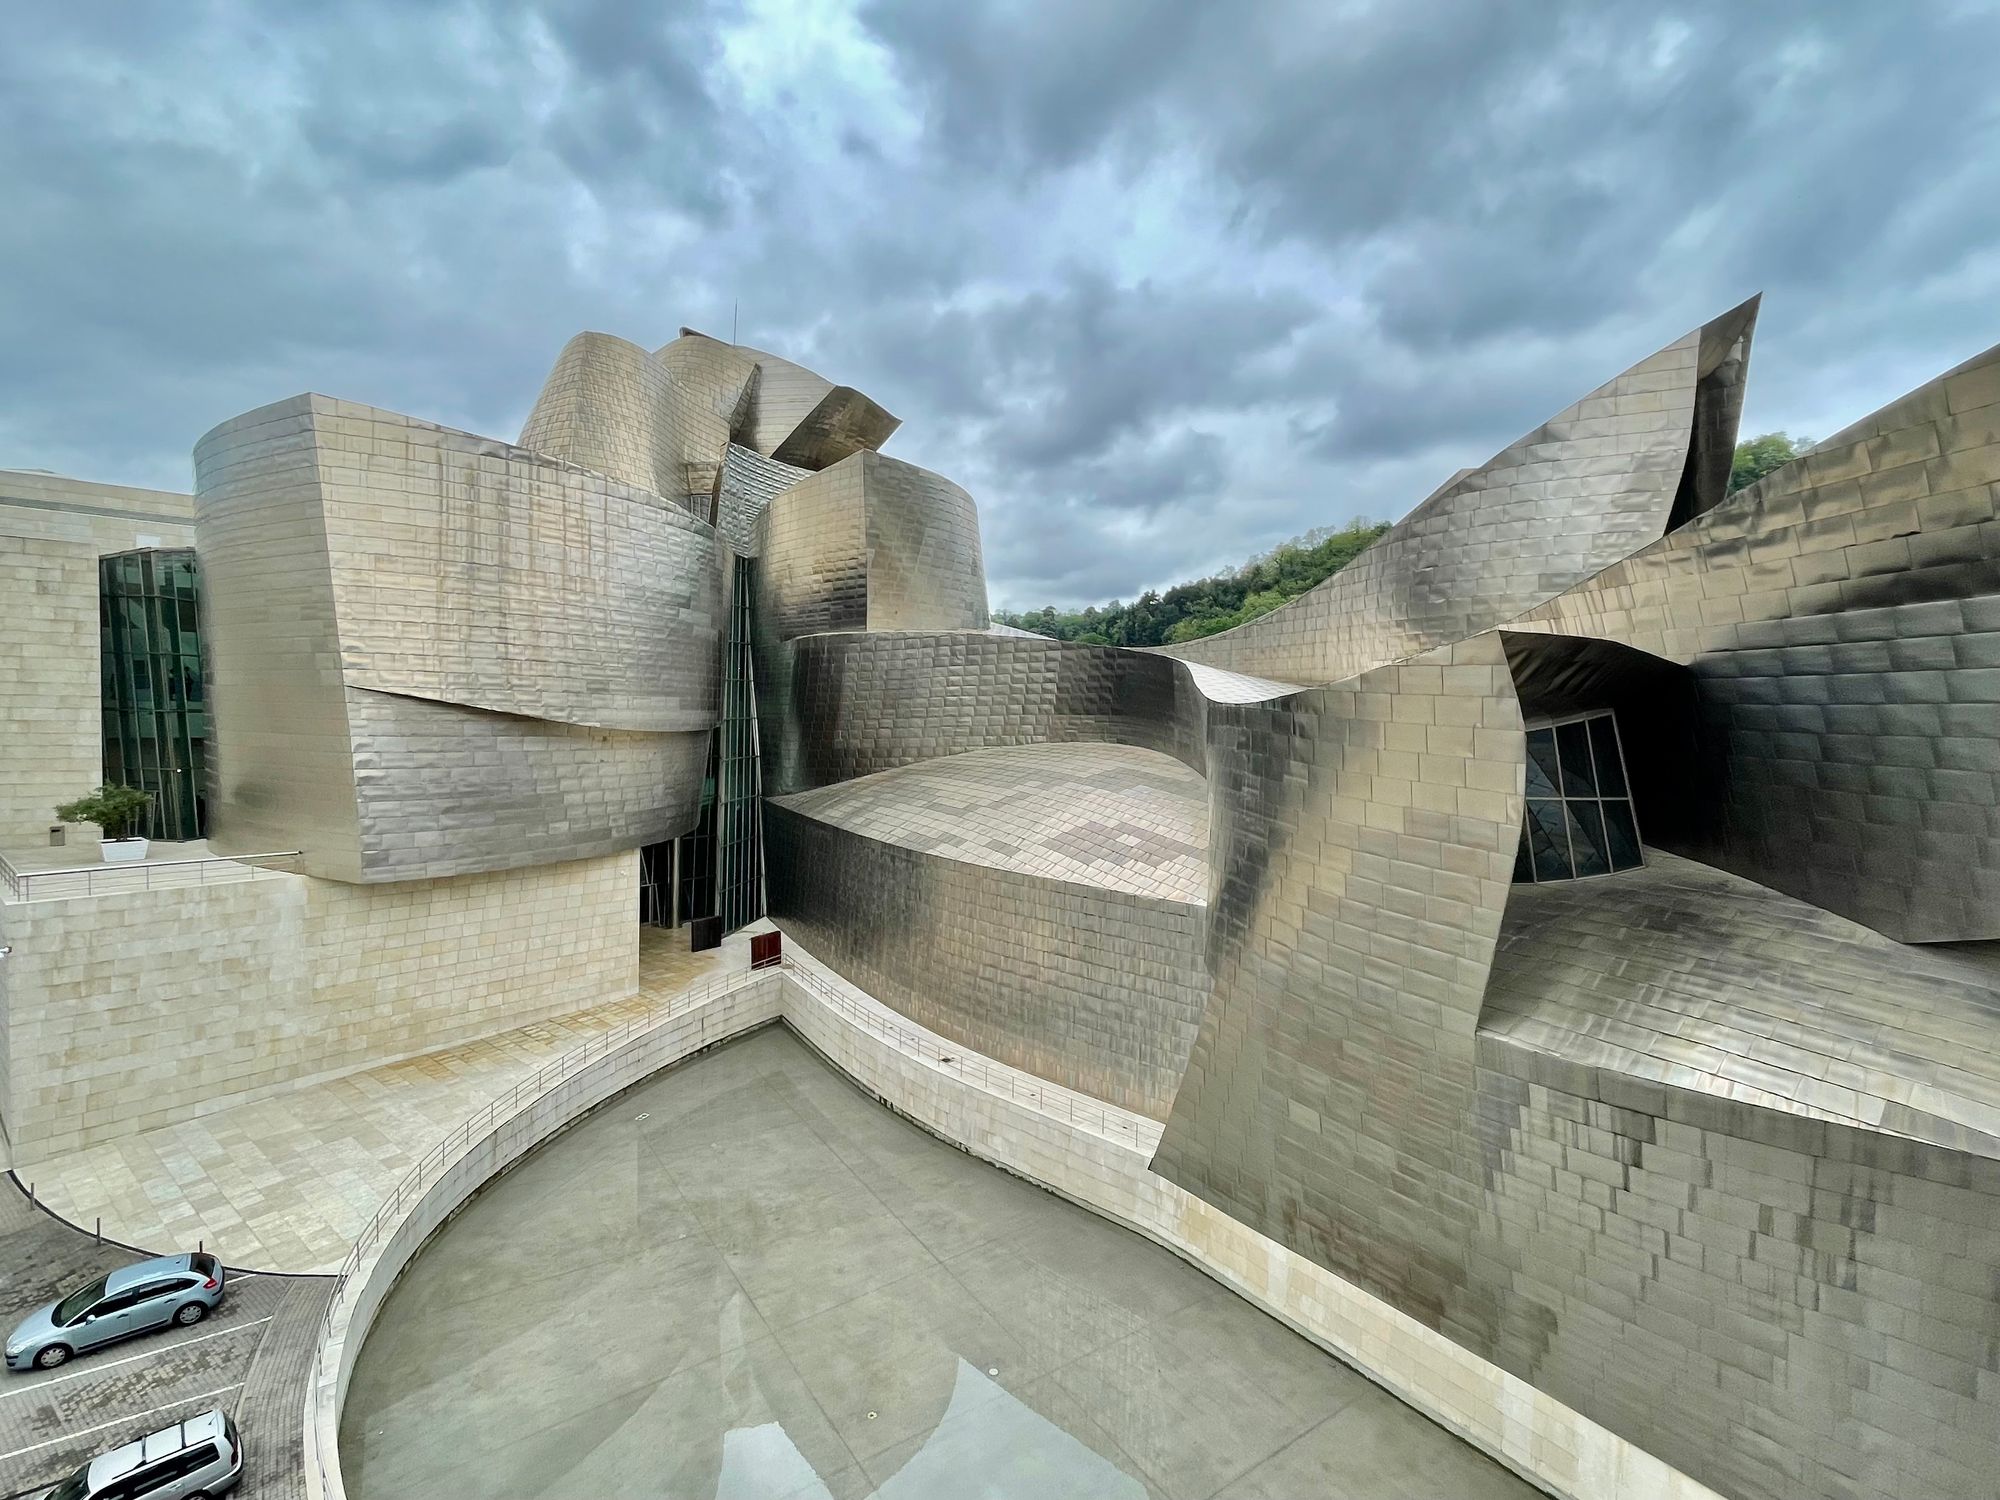 Frank Gehry's Guggenheim in Bilbao. The whole building was modelled out, physically and digitally.